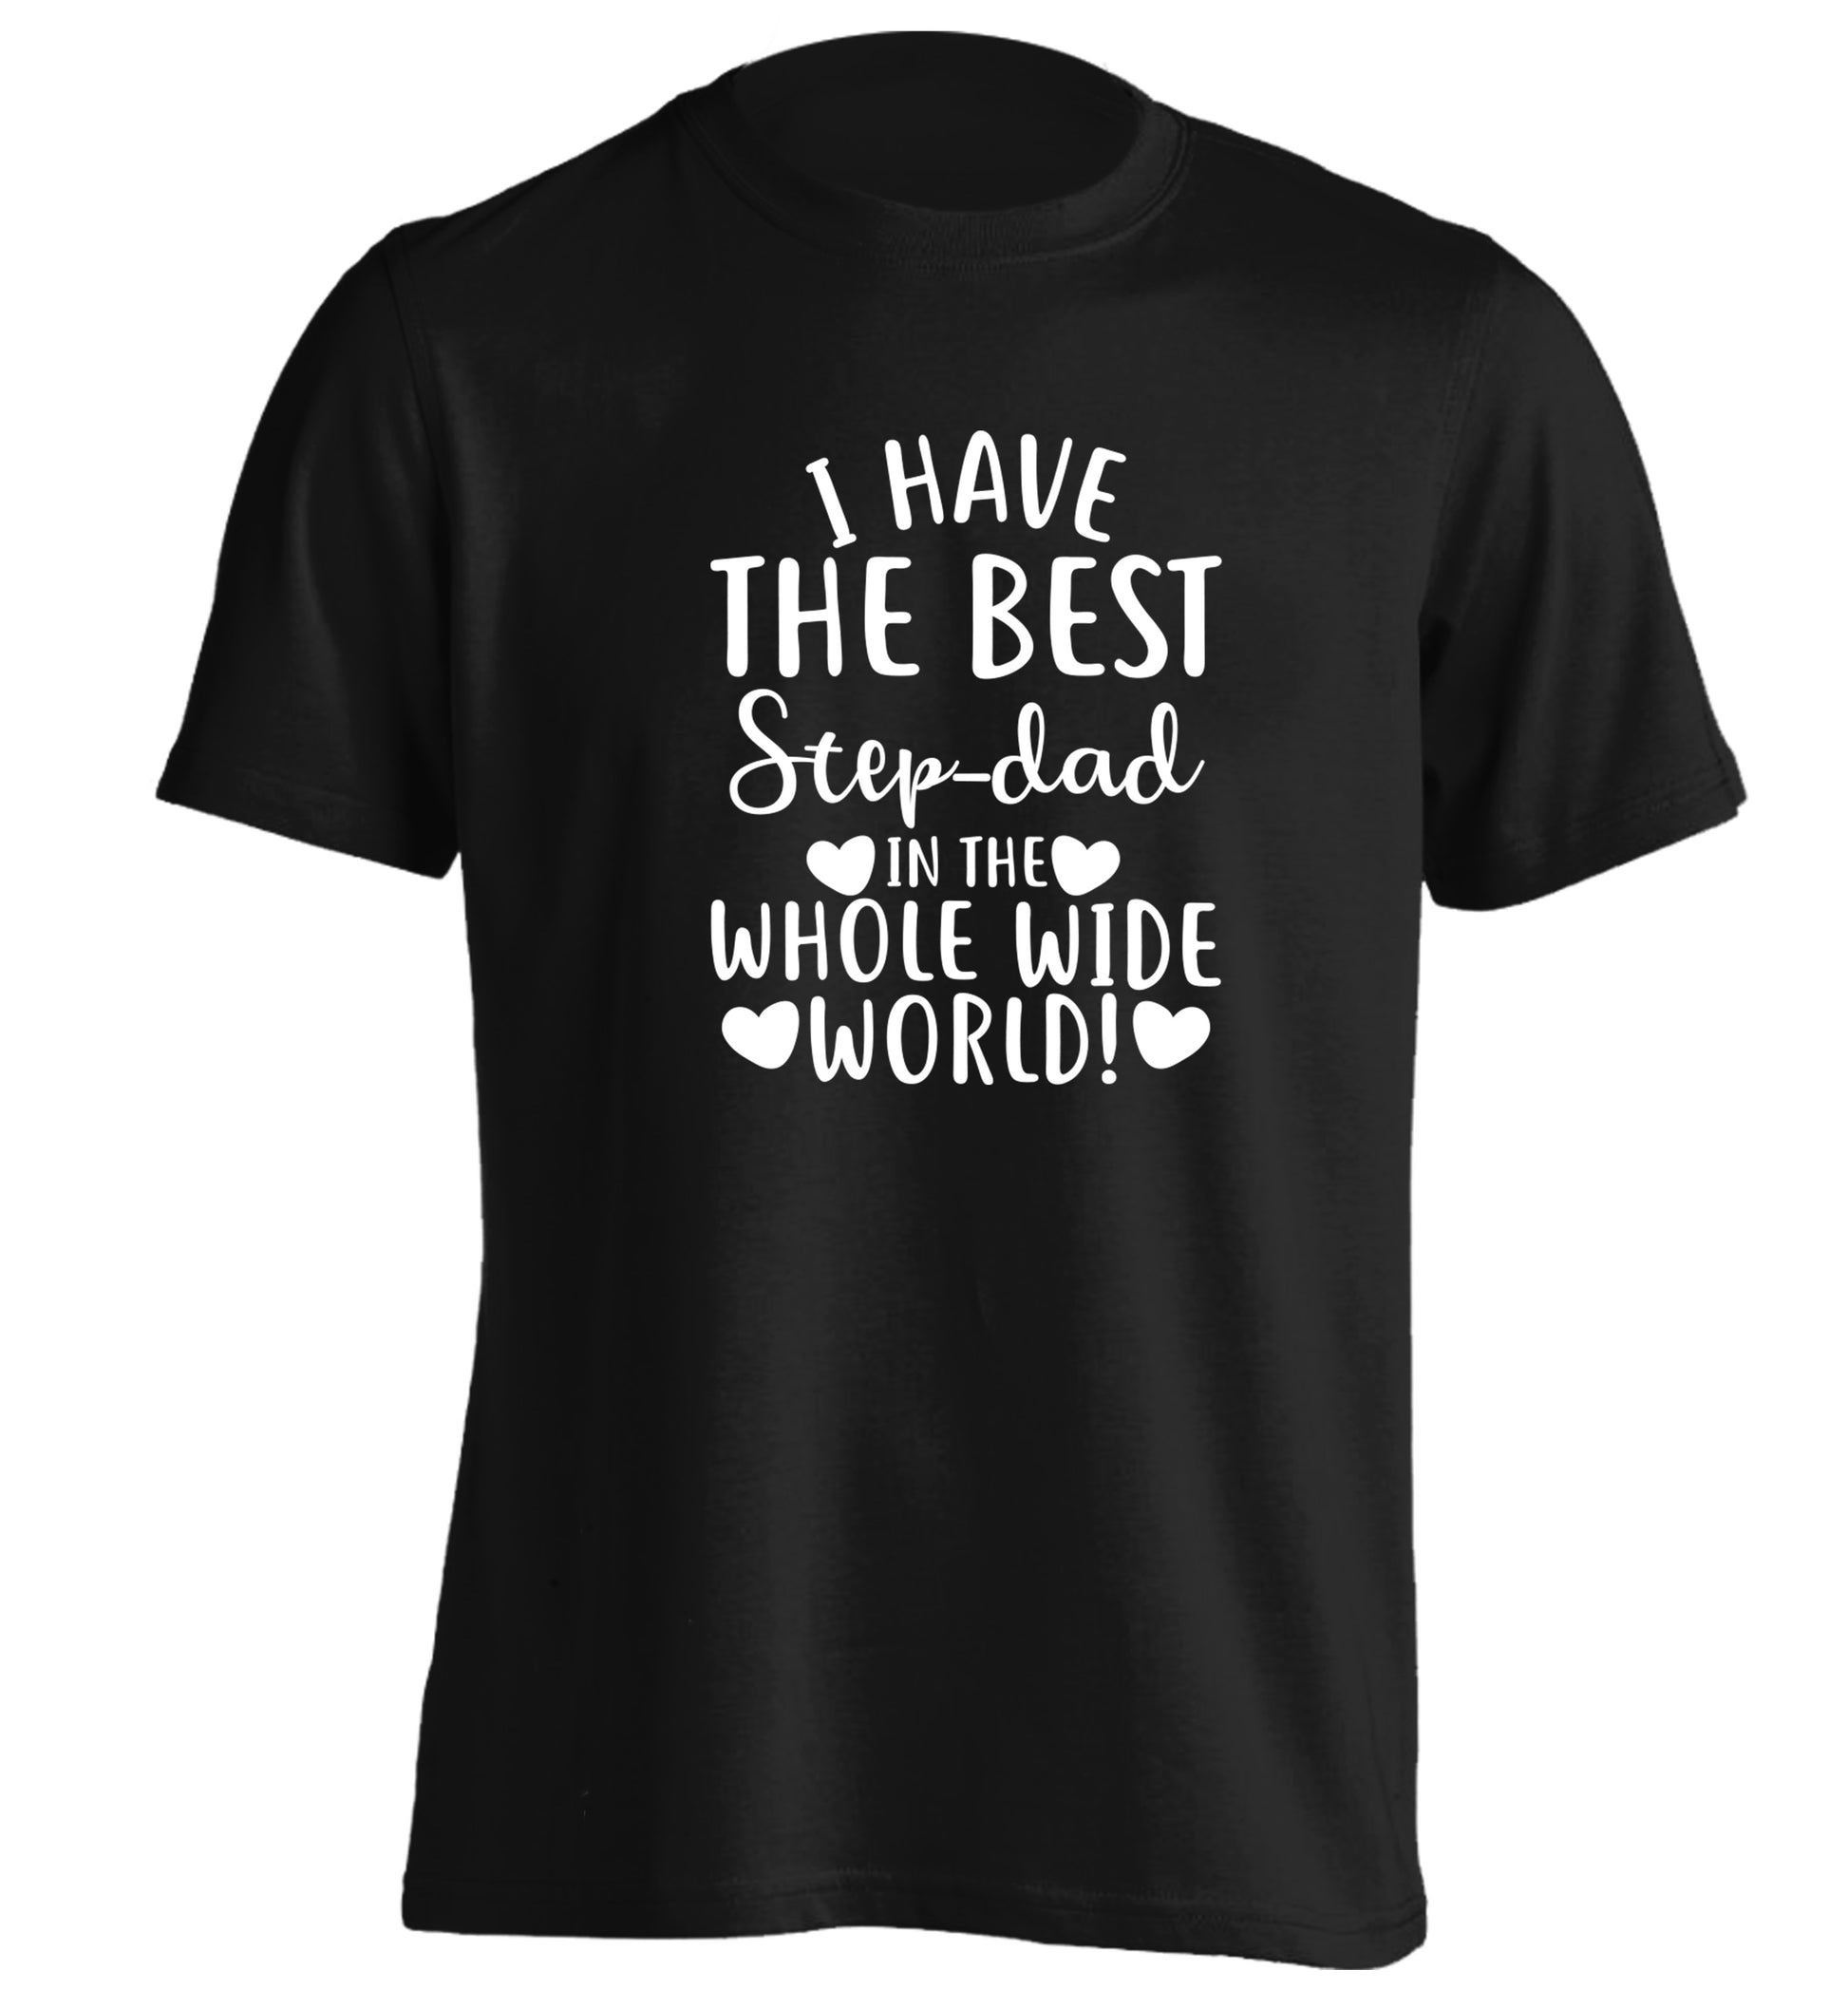 I have the best step-dad in the whole wide world! adults unisex black Tshirt 2XL